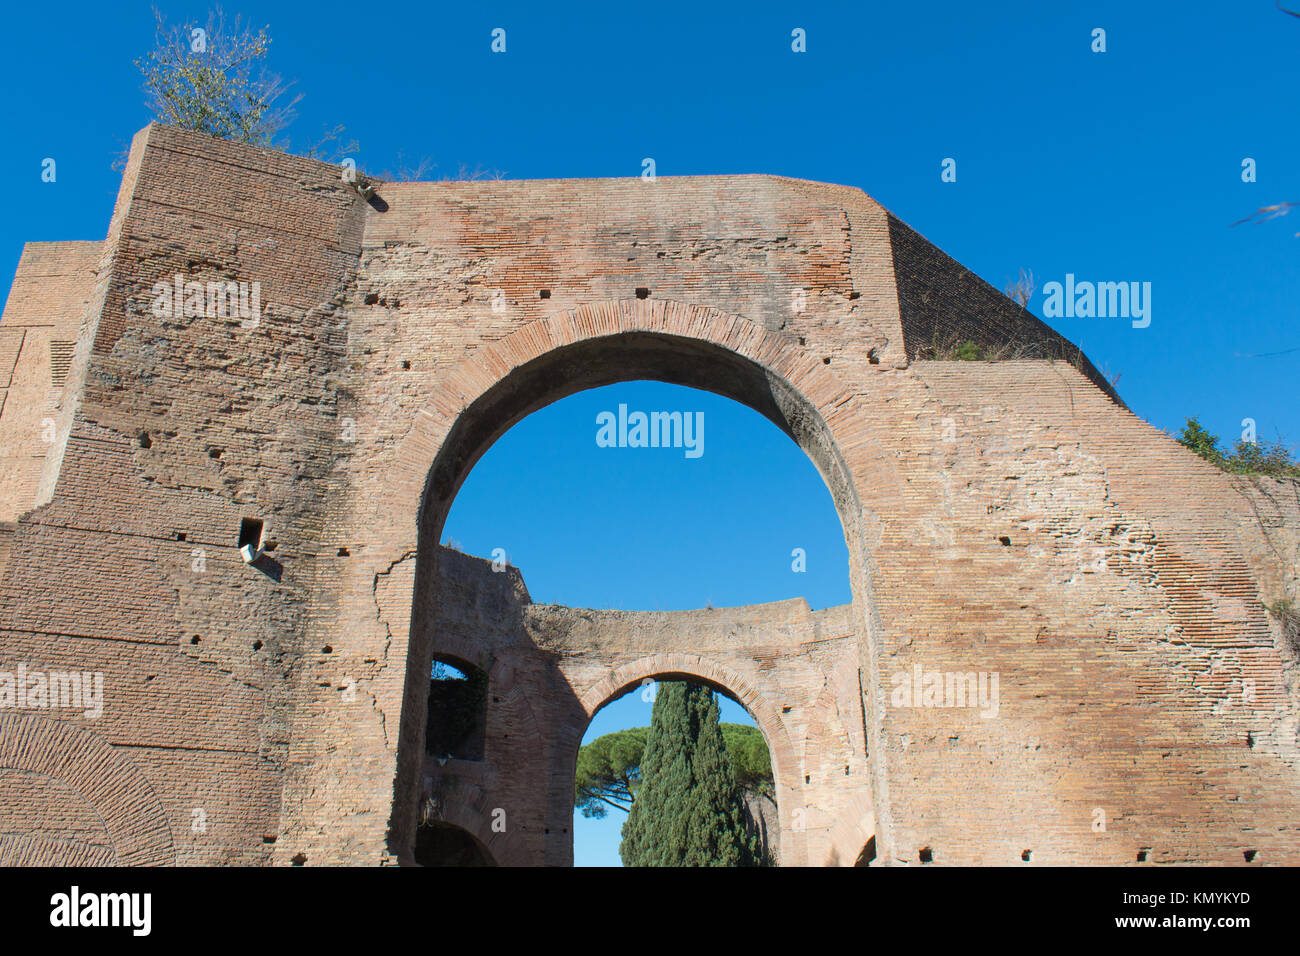 An archway in the Terme di Caracalla. Rome, Italy. Stock Photo